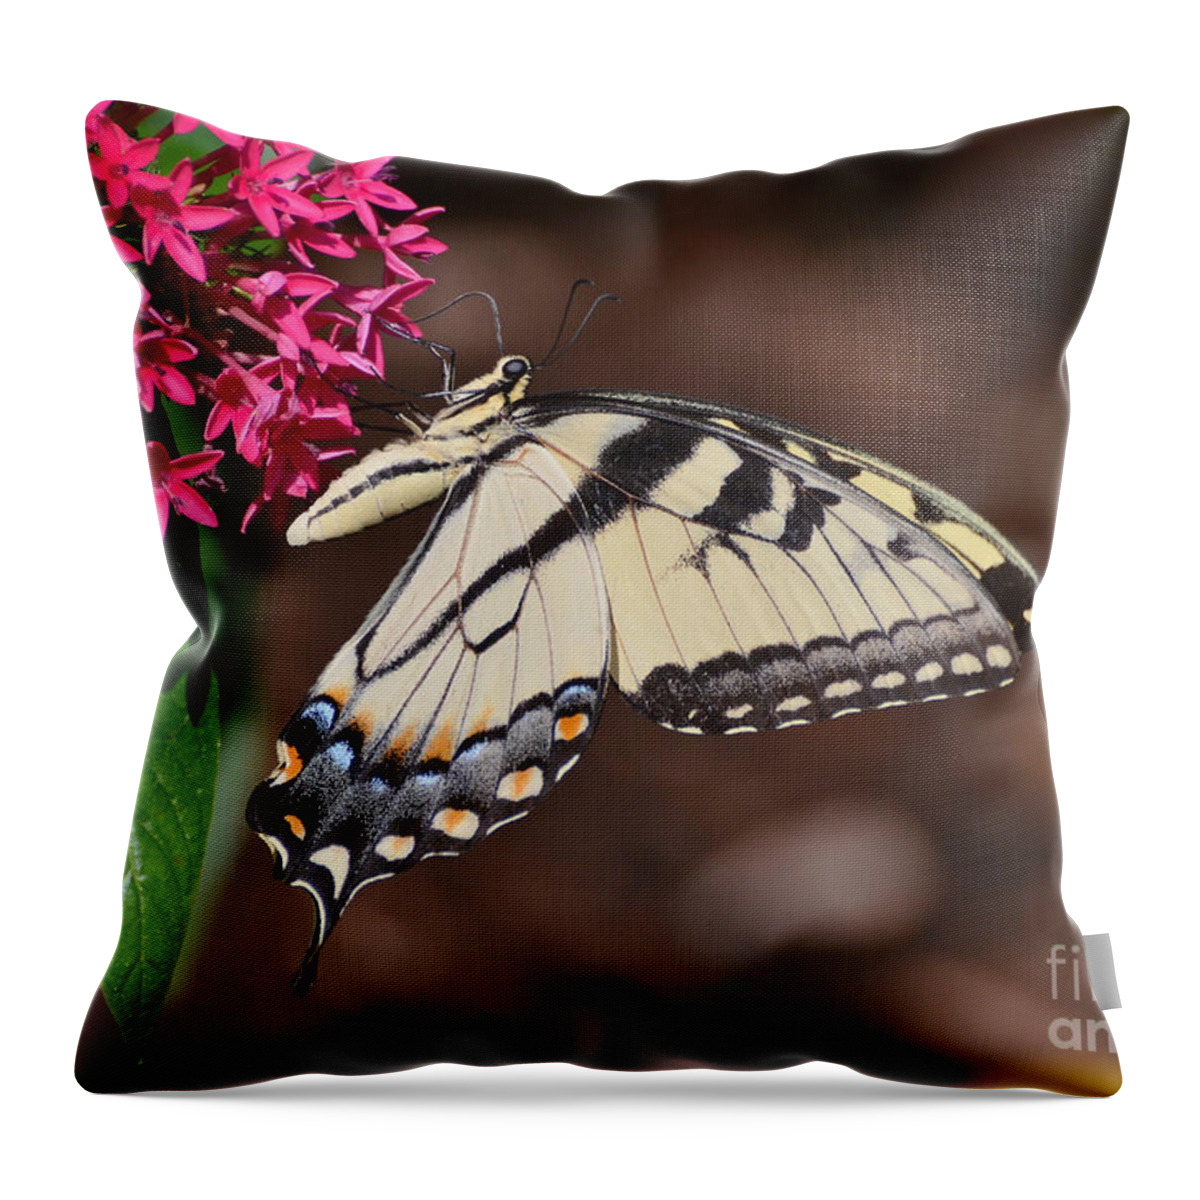 Butterfly Throw Pillow featuring the photograph Pretty Swallowtail On Pentas by Kathy Baccari